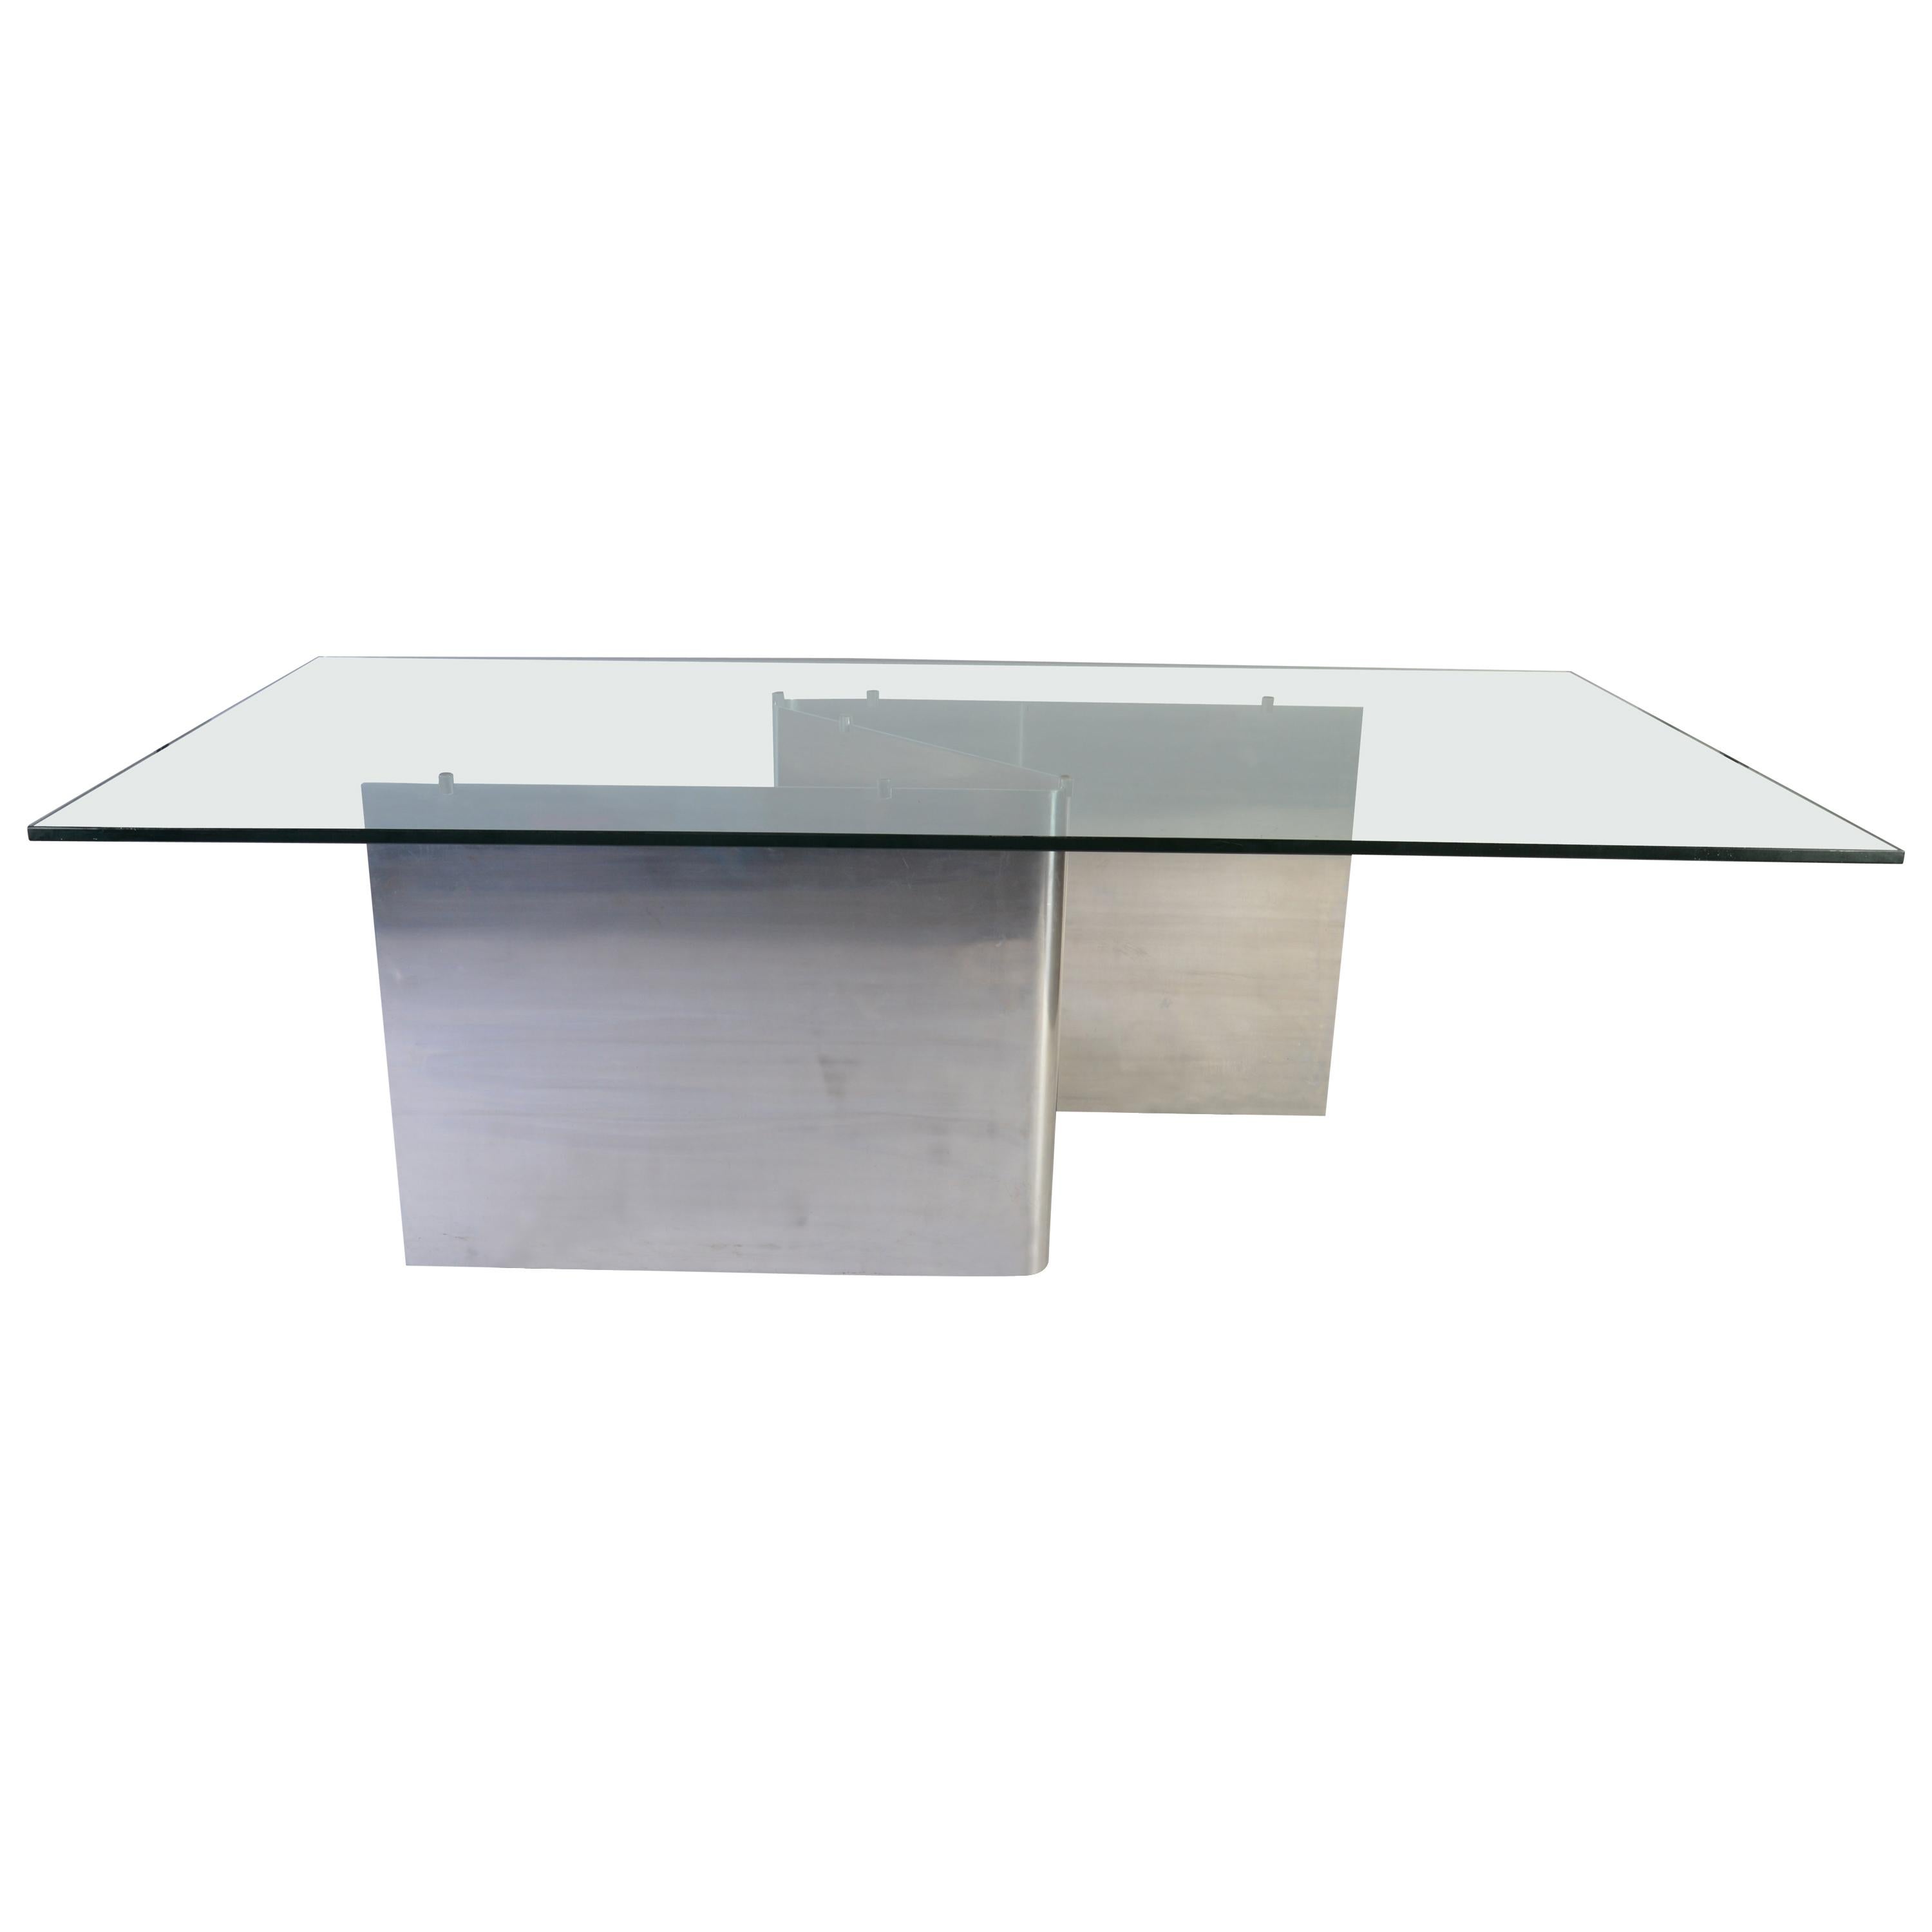 Ron Seff Style Sculptural Stainless Steel Glass Top Dining Table, circa 1970